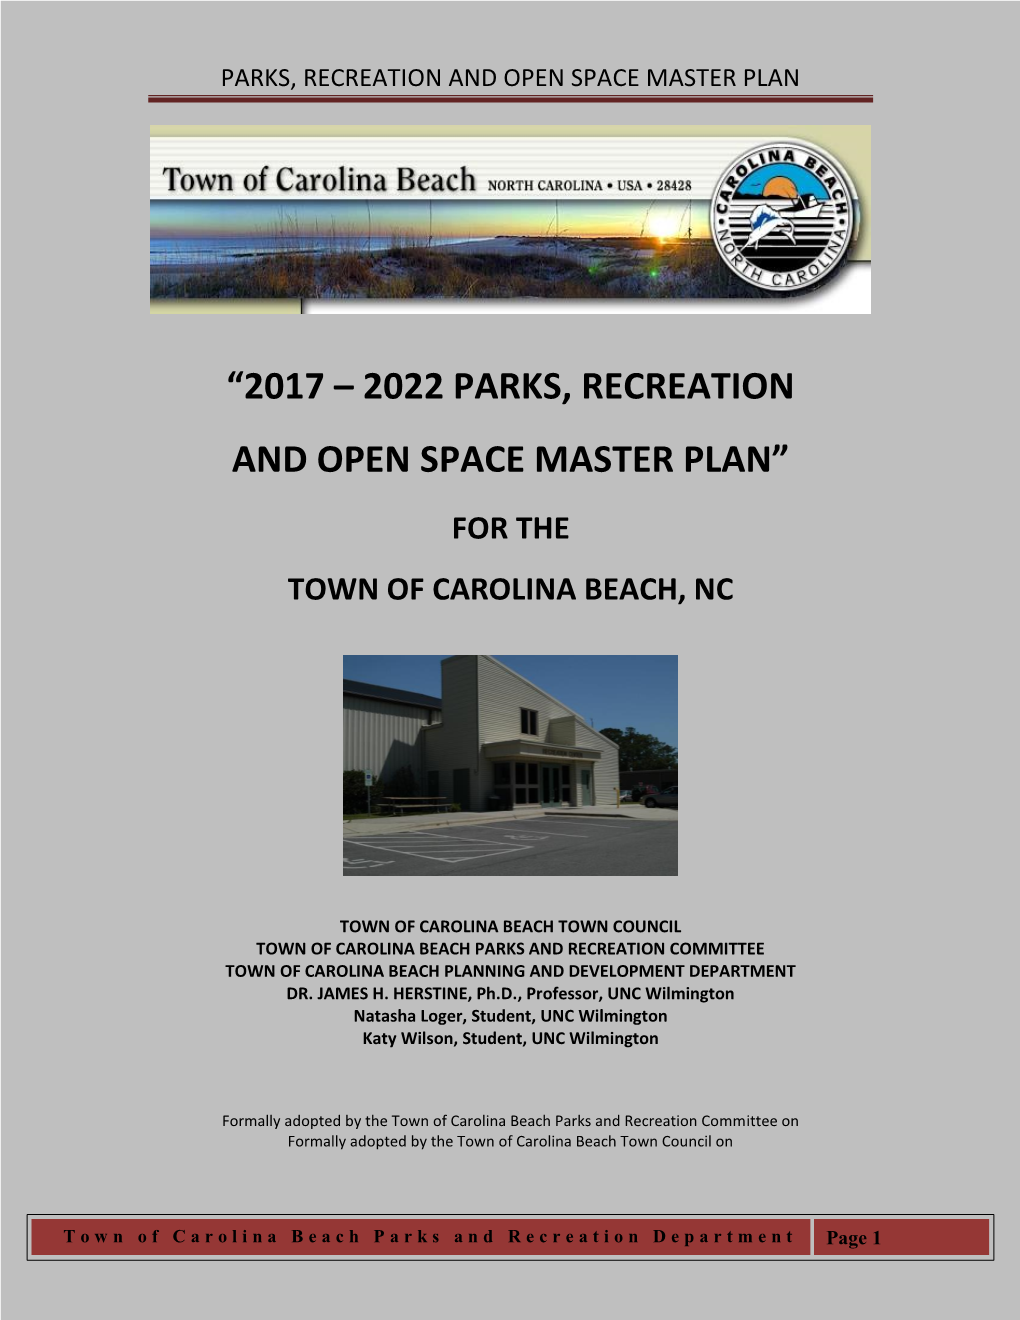 2017 -2022 Parks, Recreation and Open Space Master Plan